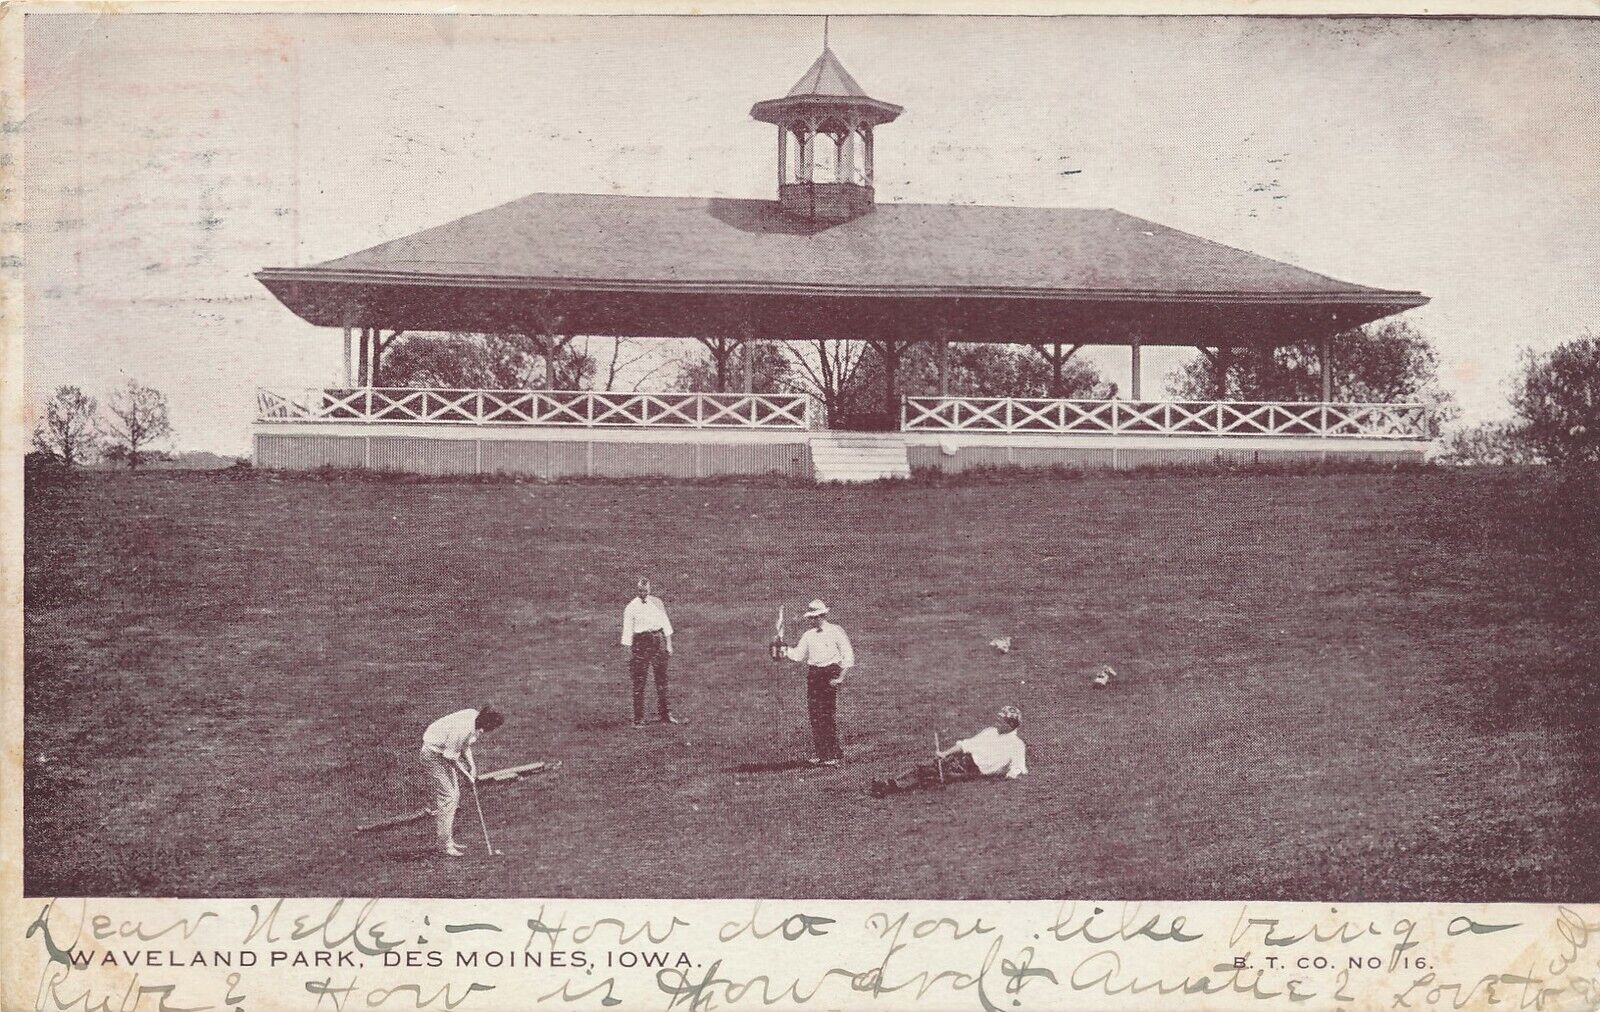 DES MOINES IA – Playing Golf at Waveland Park – udb – mailed 1908